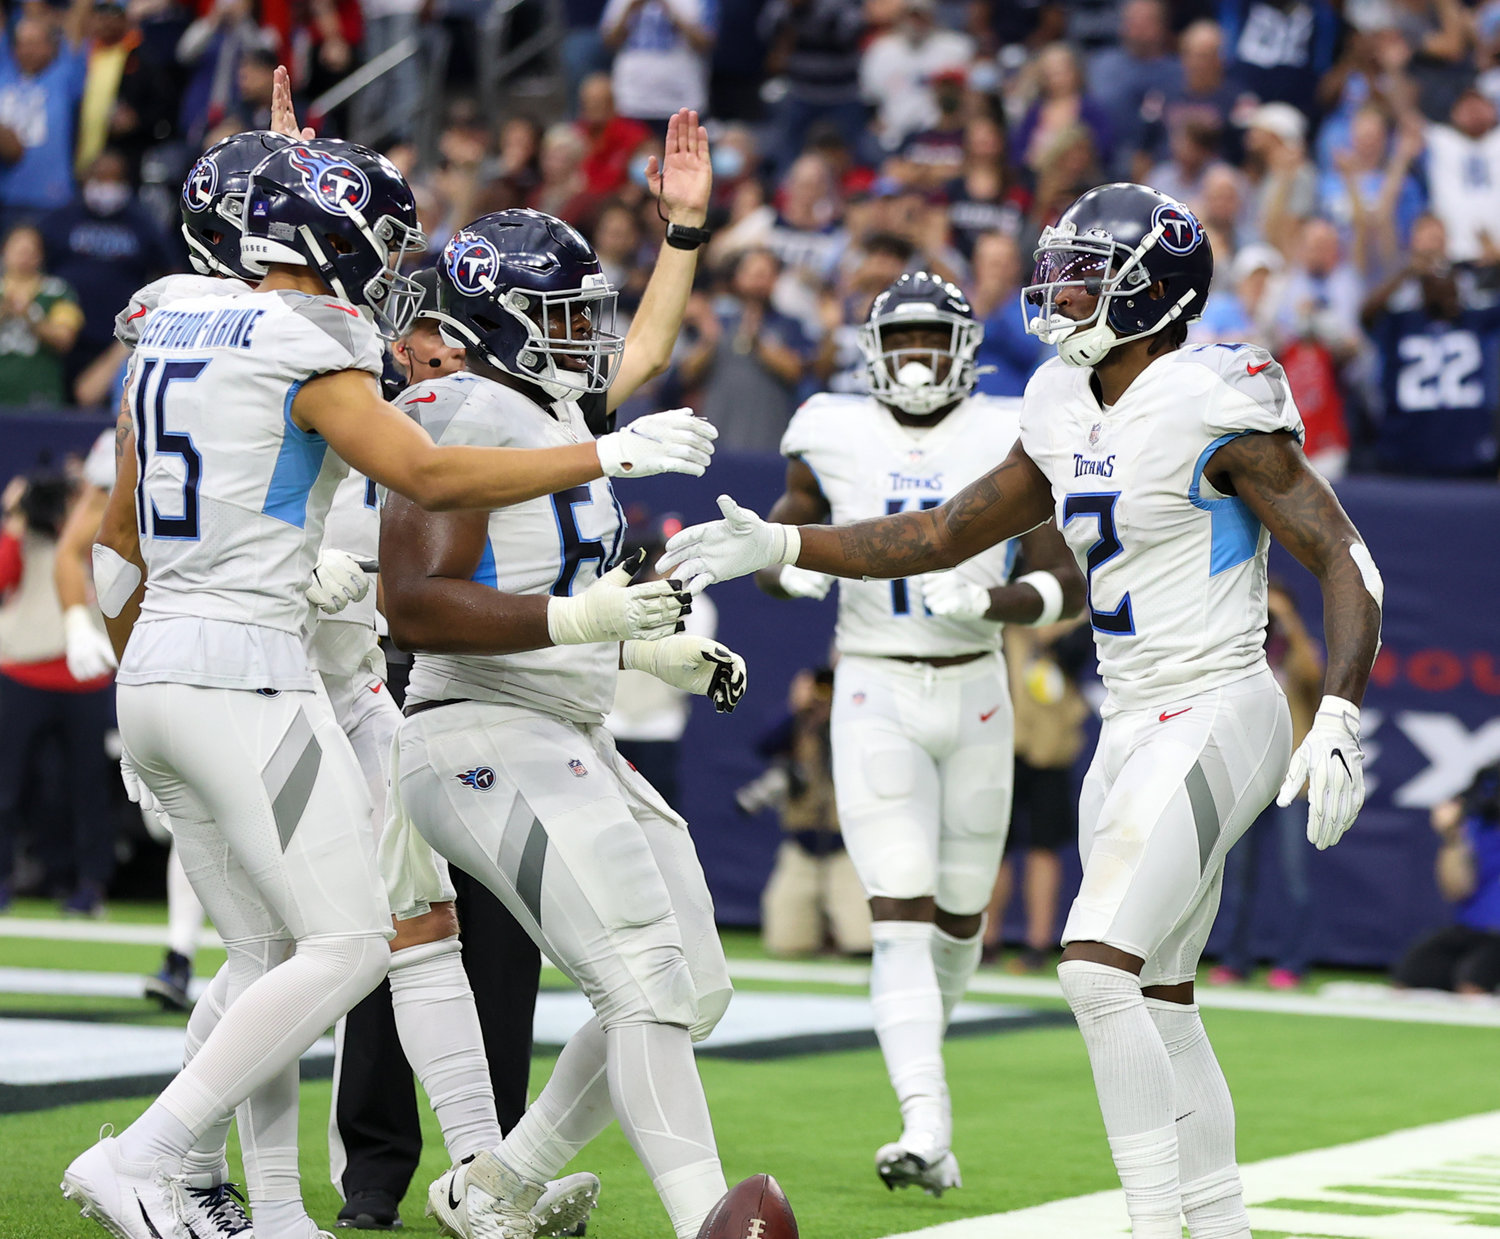 Teammates congratulate Tennessee Titans wide receiver Julio Jones (2) after a touchdown catch in the fourth quarter of an NFL game between the Texans and the Titans on Jan. 9, 2022 in Houston, Texas. The Titans won, 28-25.